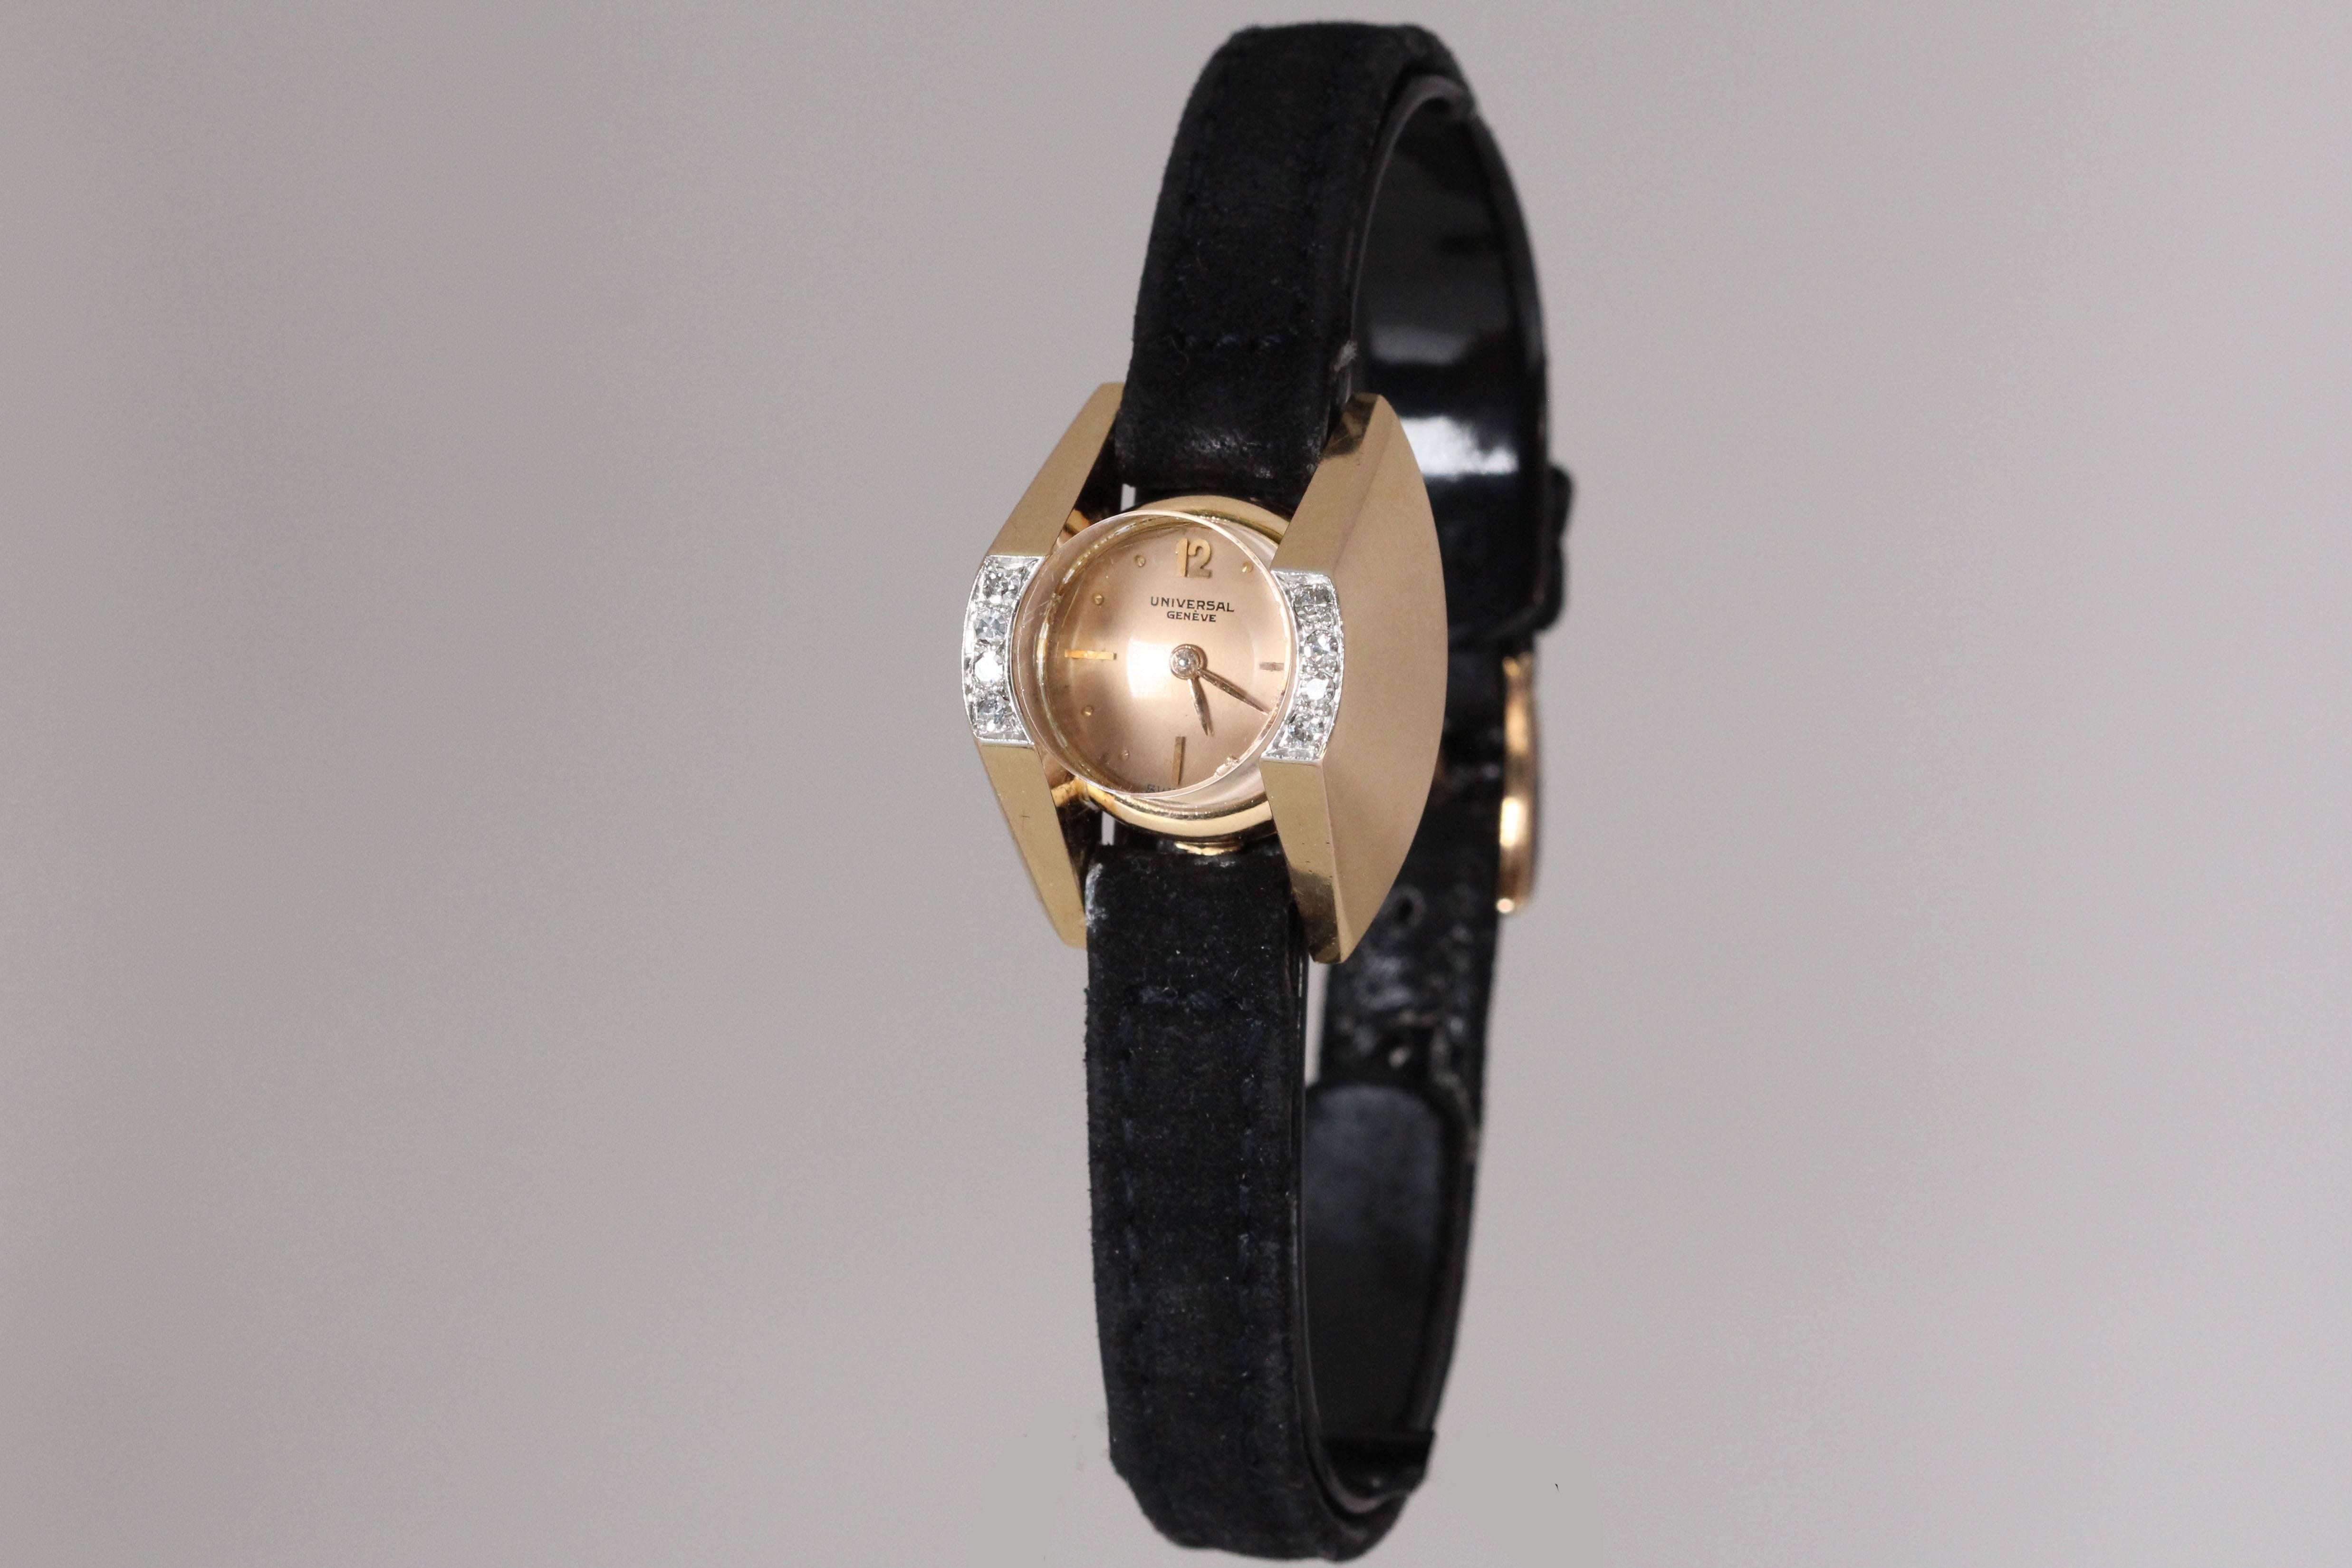 Stylish vintage Universal Geneve lady's yellow gold  and diamond wristwatch.  Crystal diameter is 13mm.